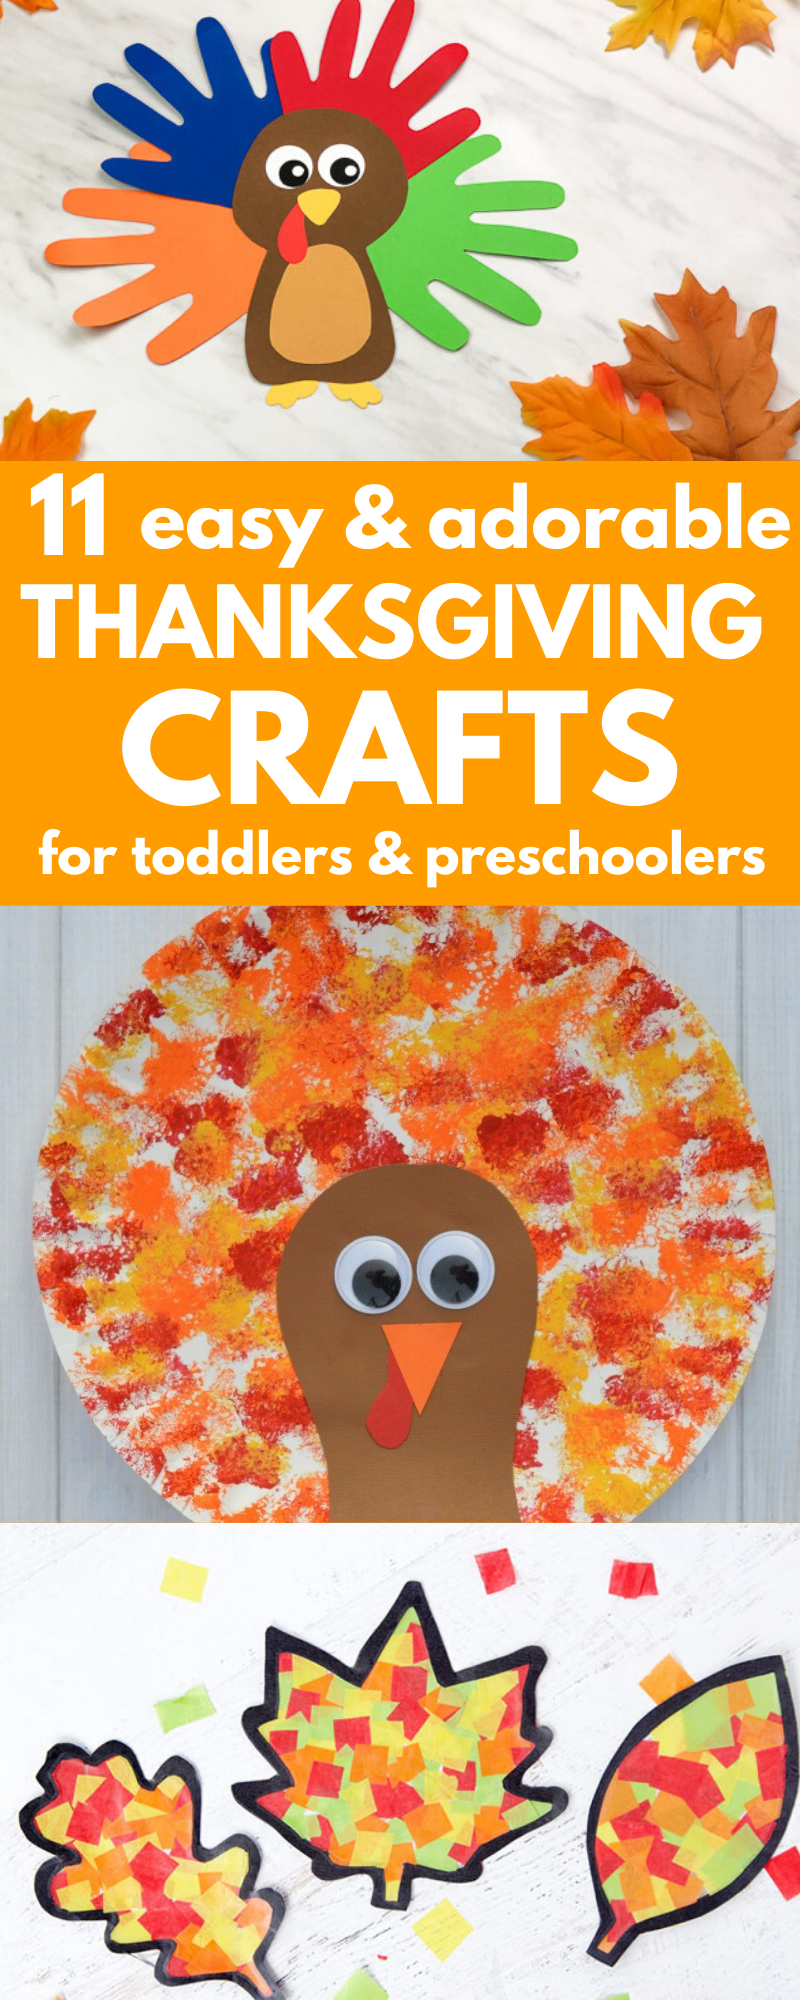 11 Easy Thanksgiving Crafts for Toddlers & Preschoolers -   18 diy thanksgiving crafts for toddlers ideas